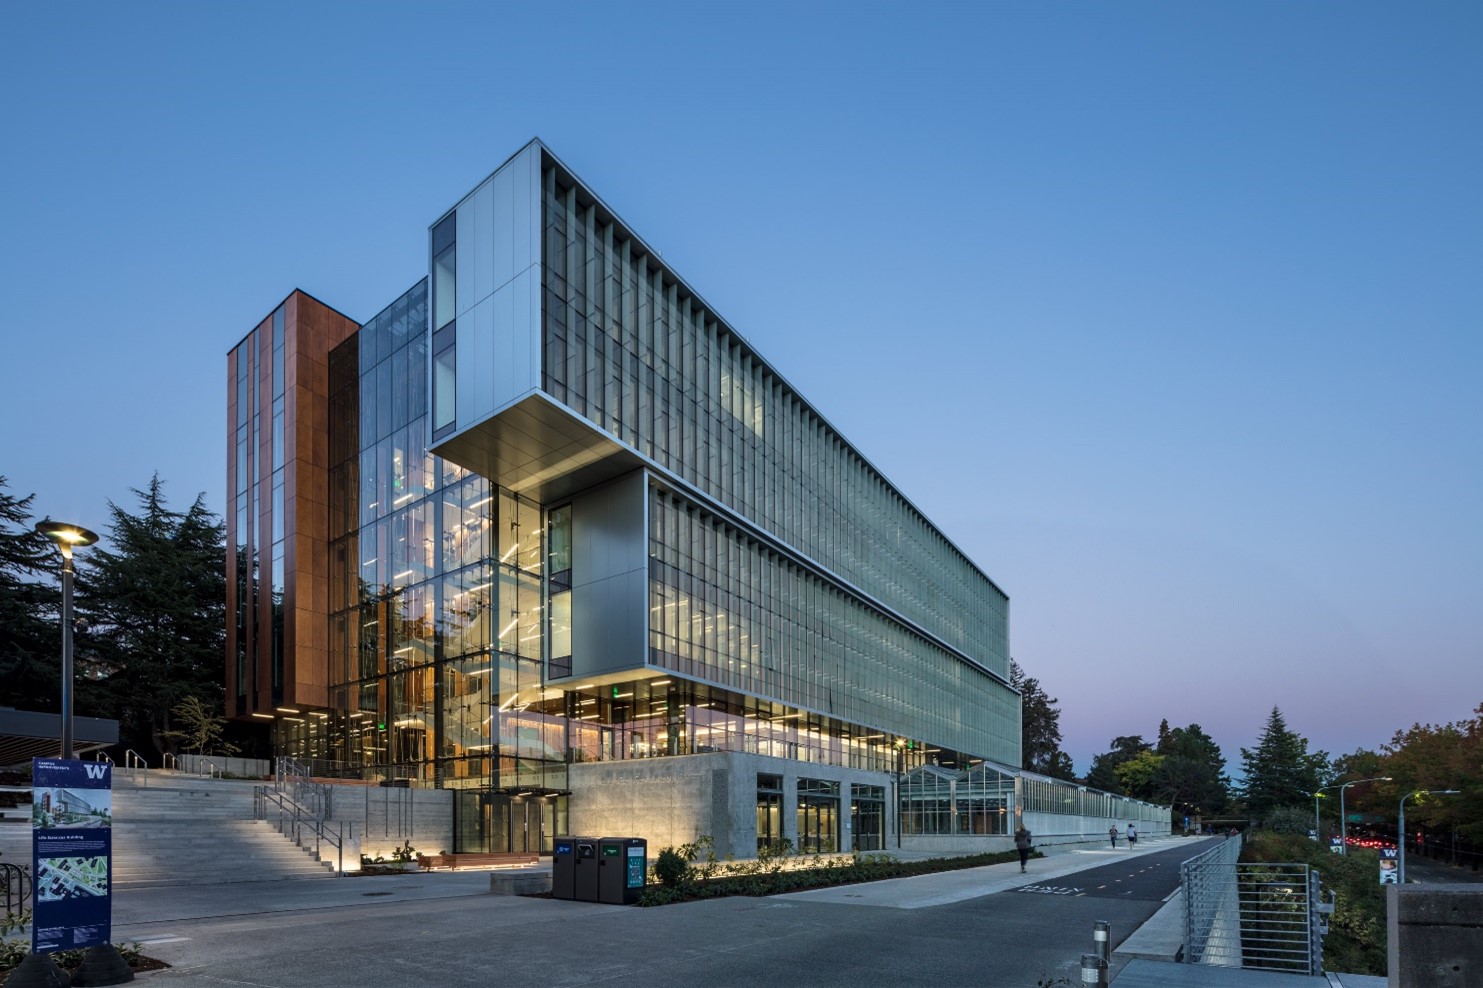 University of Washington’s Life Sciences Building earns accolades from